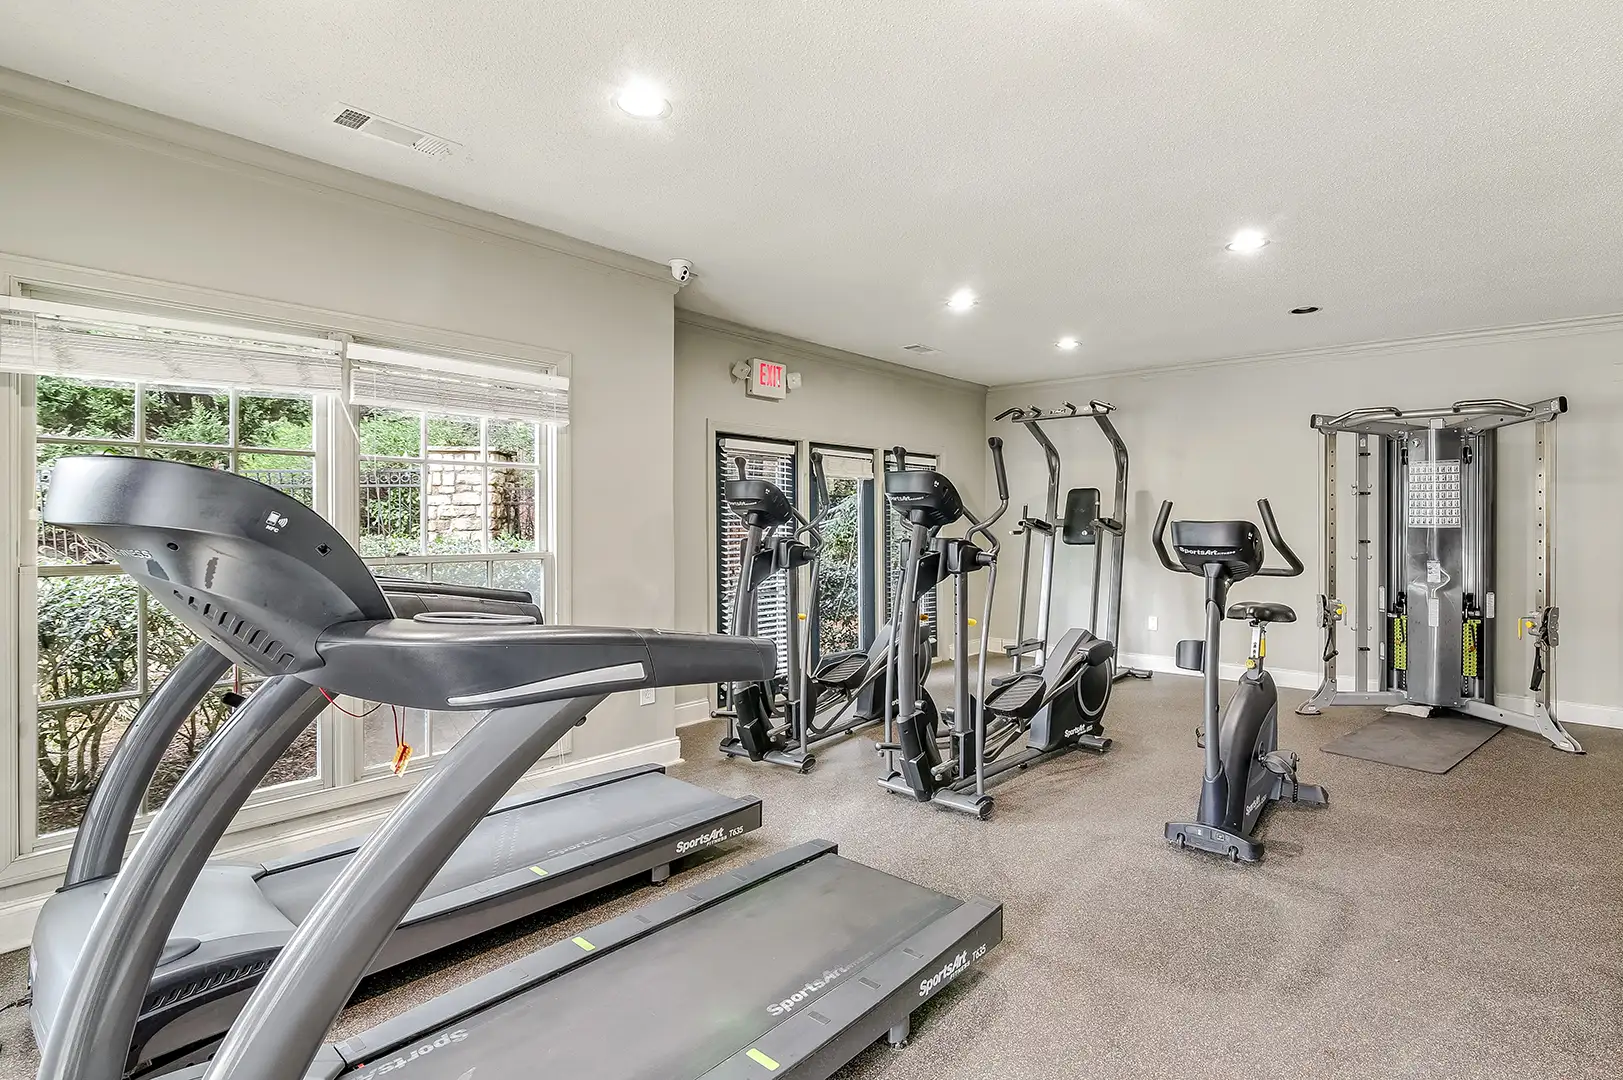 Fitness center with stationary bikes, treadmills, ellipticals, and weight lifting machines.